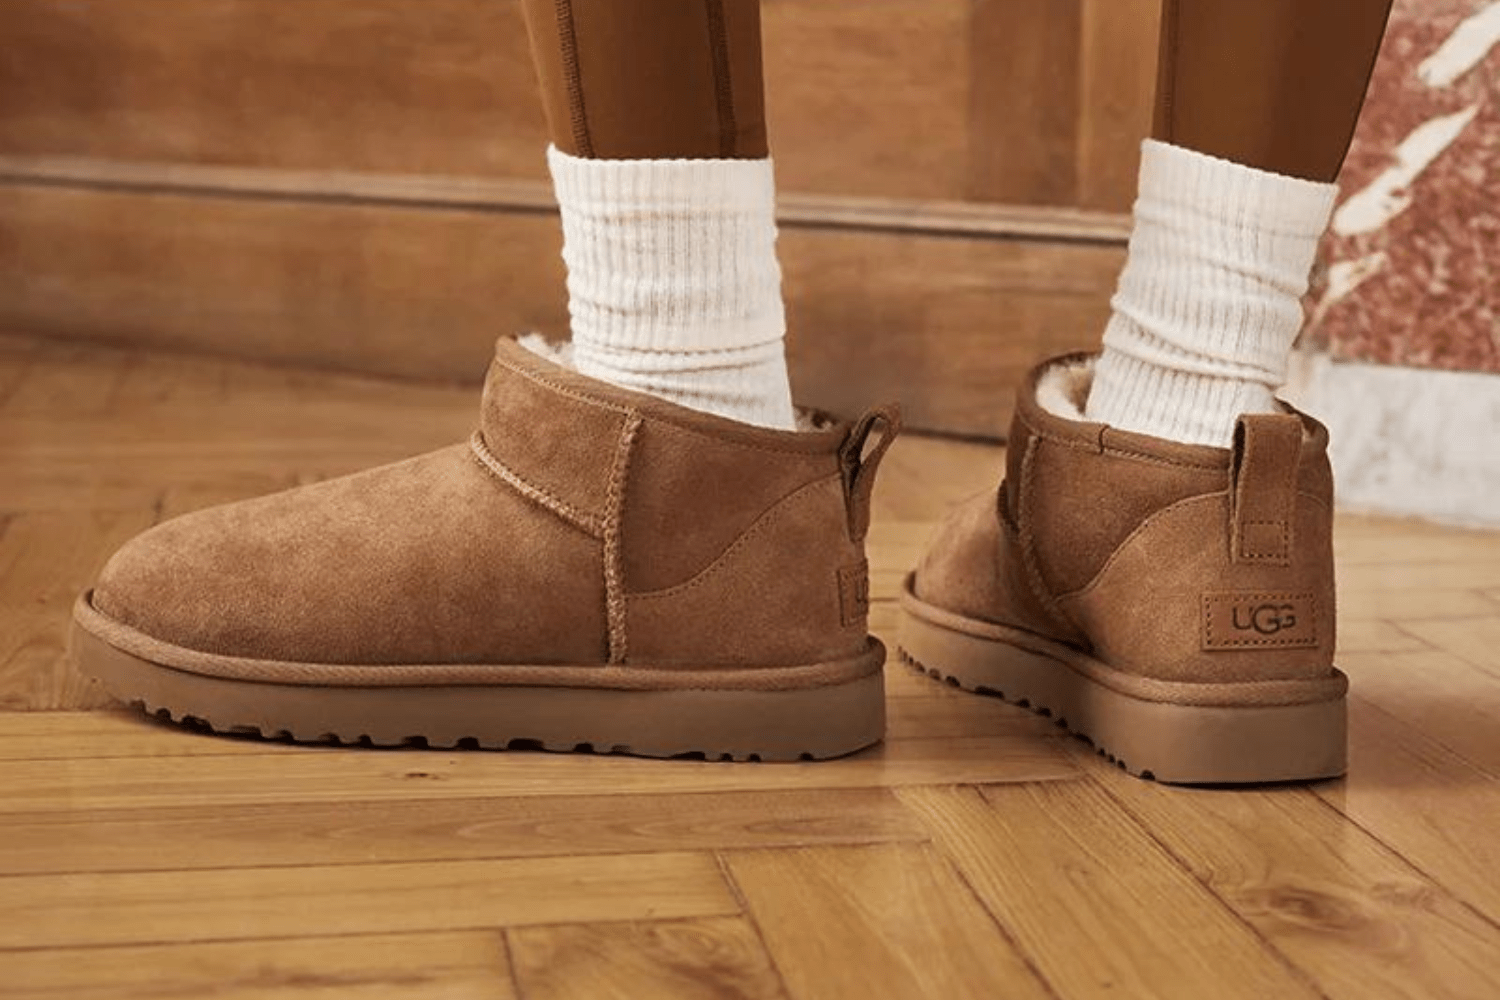 Shop these UGGs trend models at Foot Locker